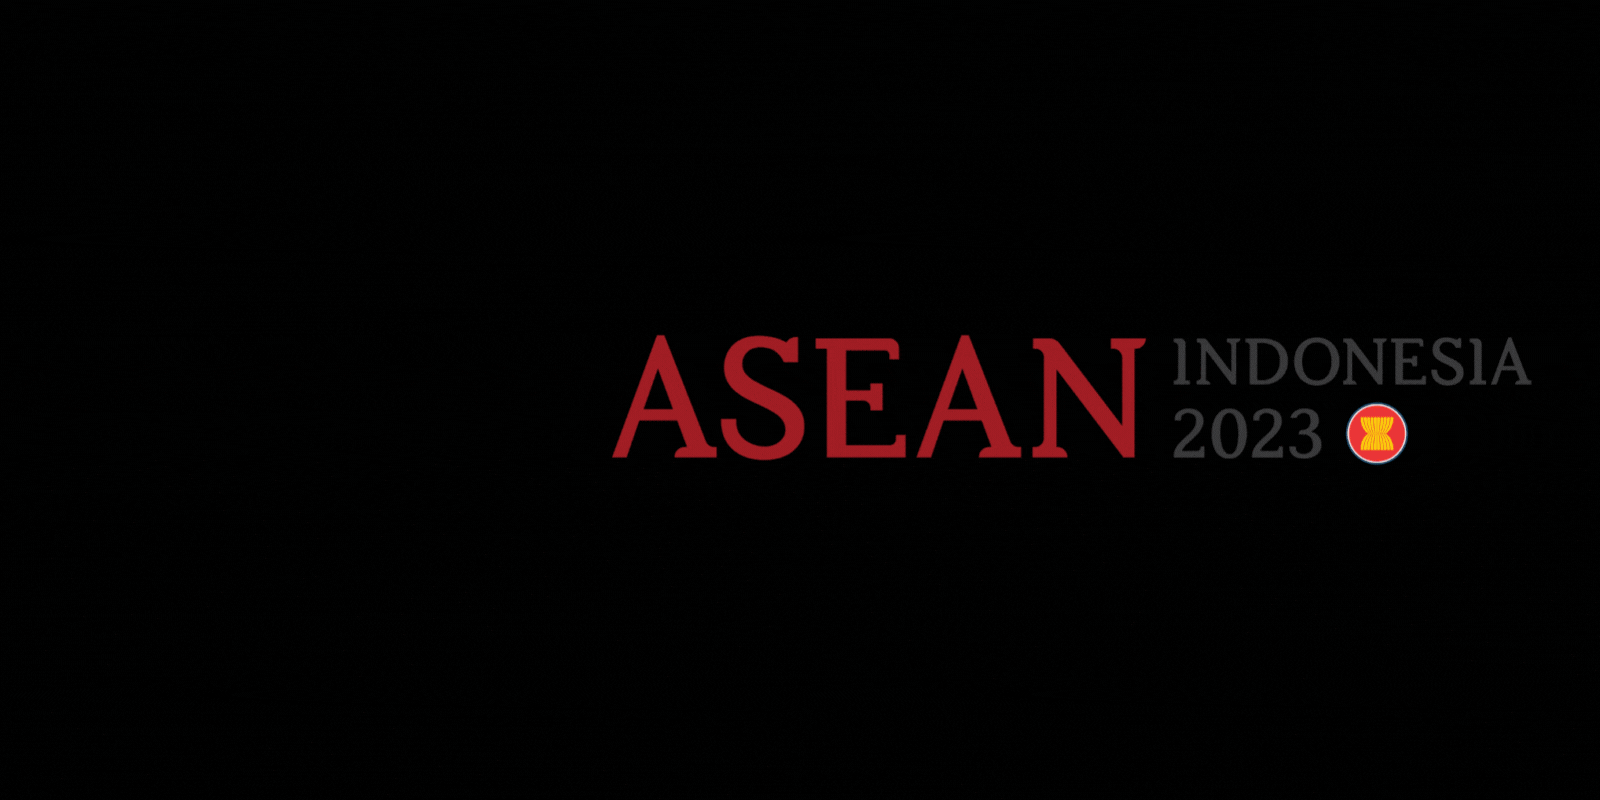 News and Information ASEAN Indonesia 2023